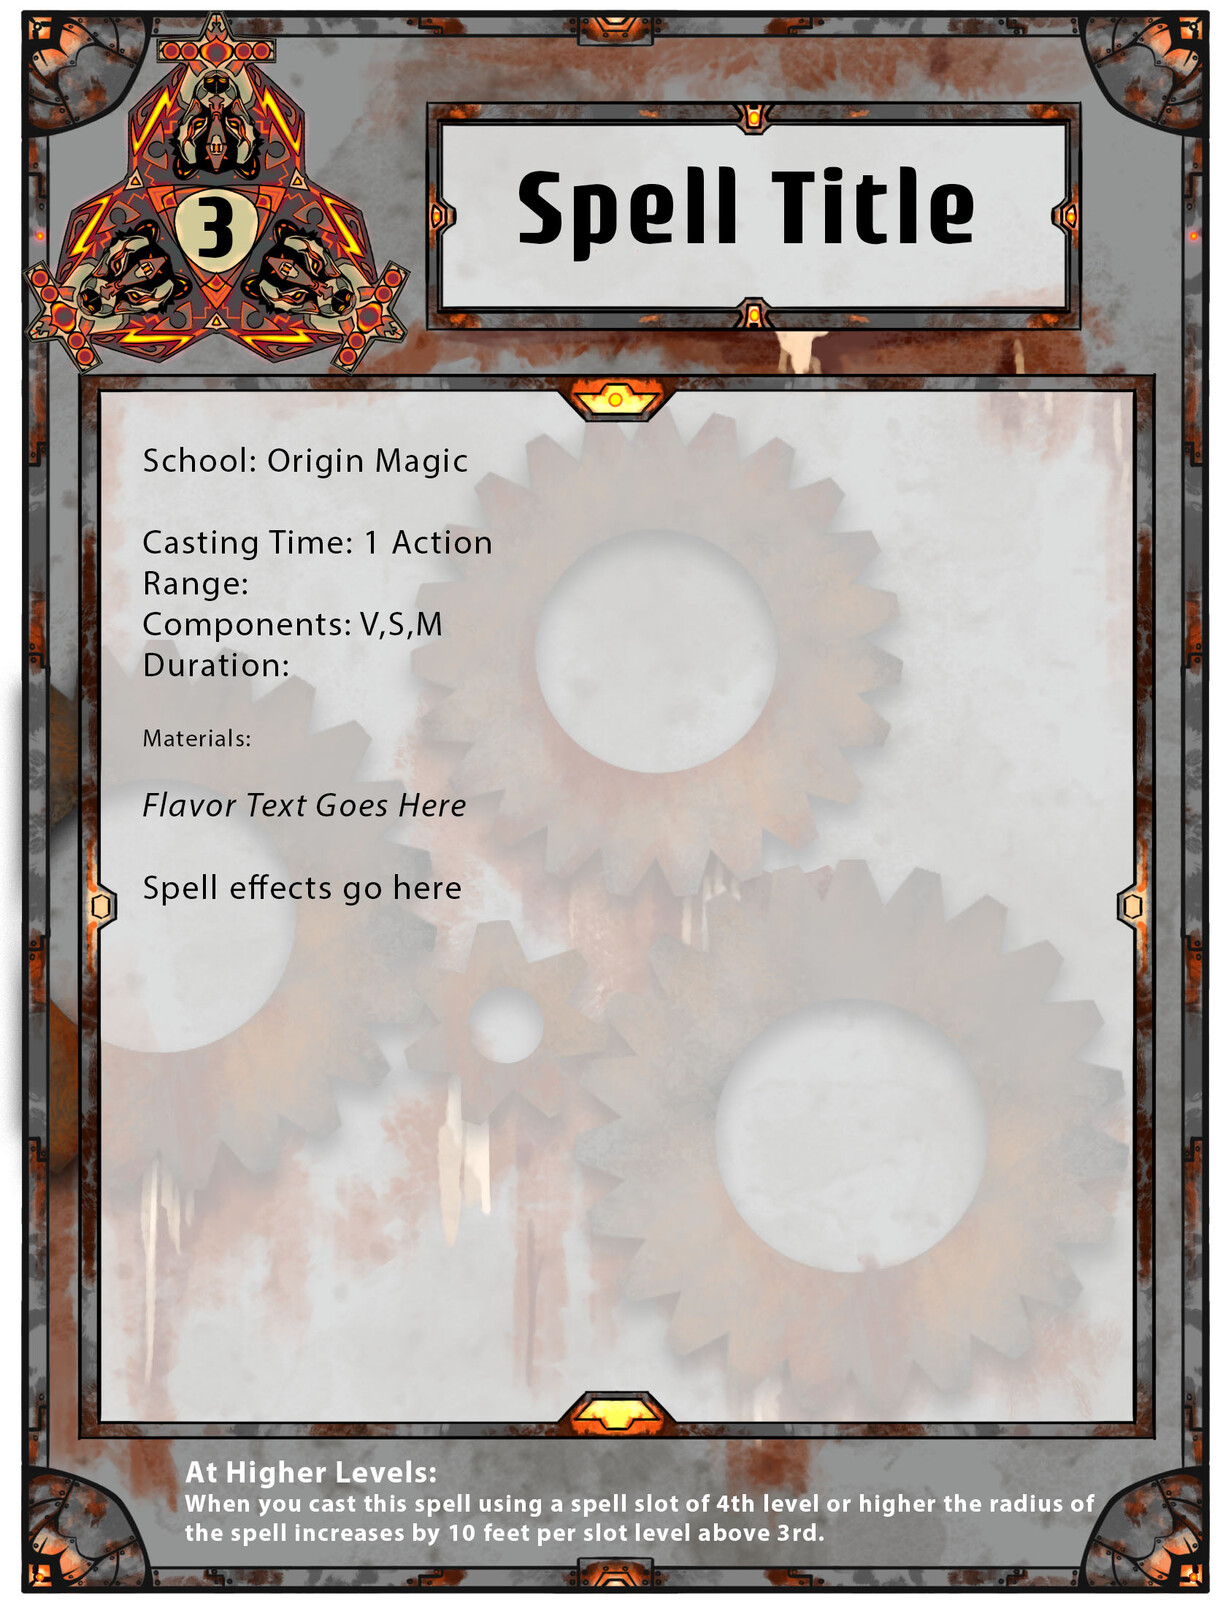 For artificers and tech-savvy spellcasters